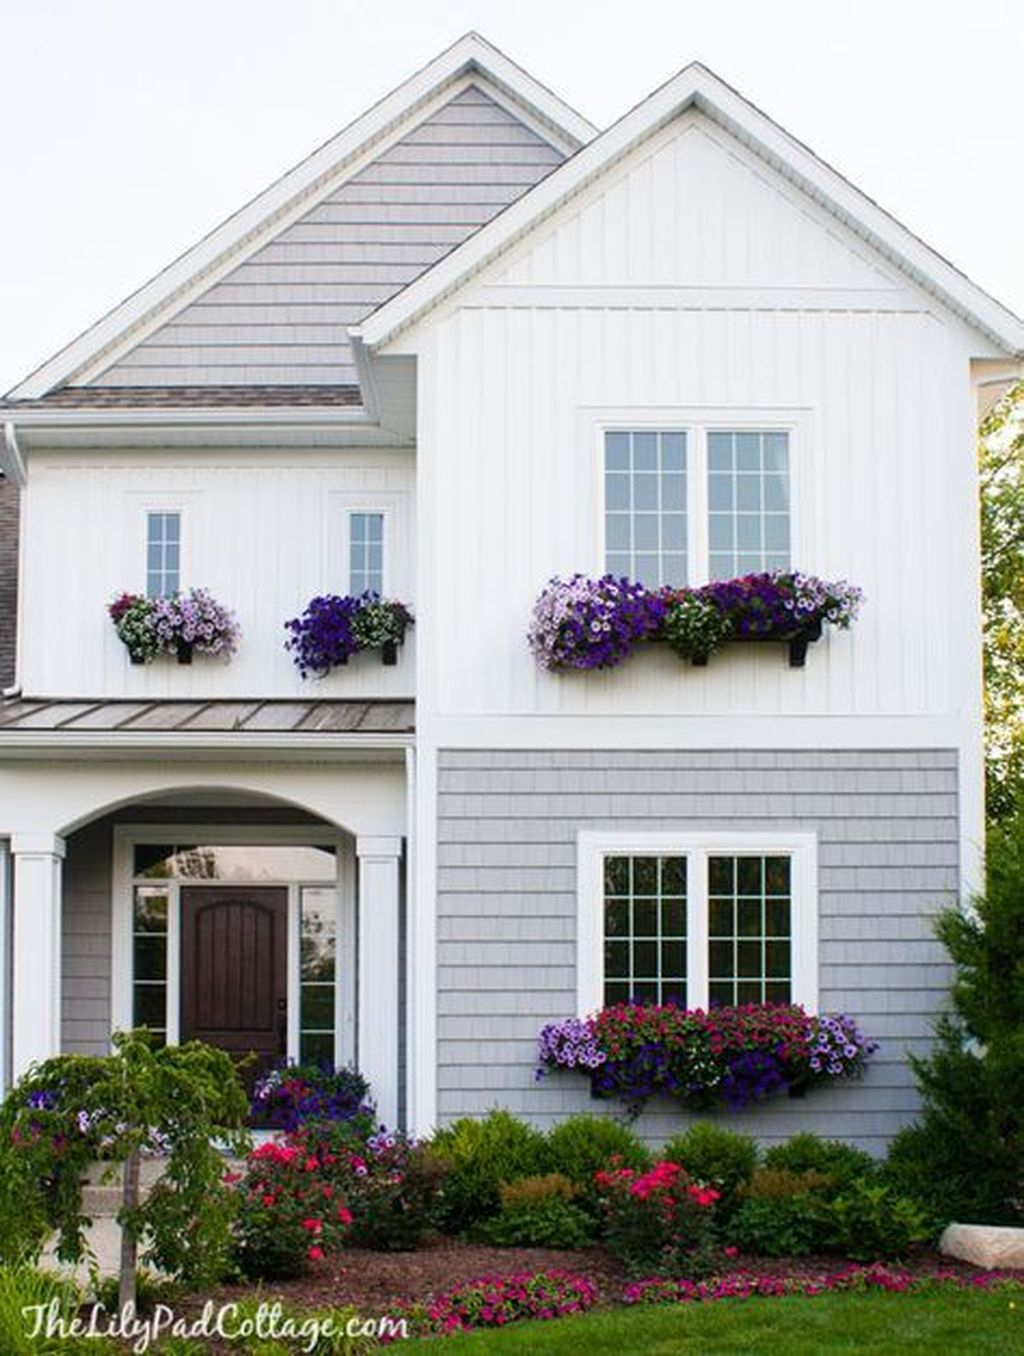 Fabulous Exterior Decoration Ideas With Flower In Window 22